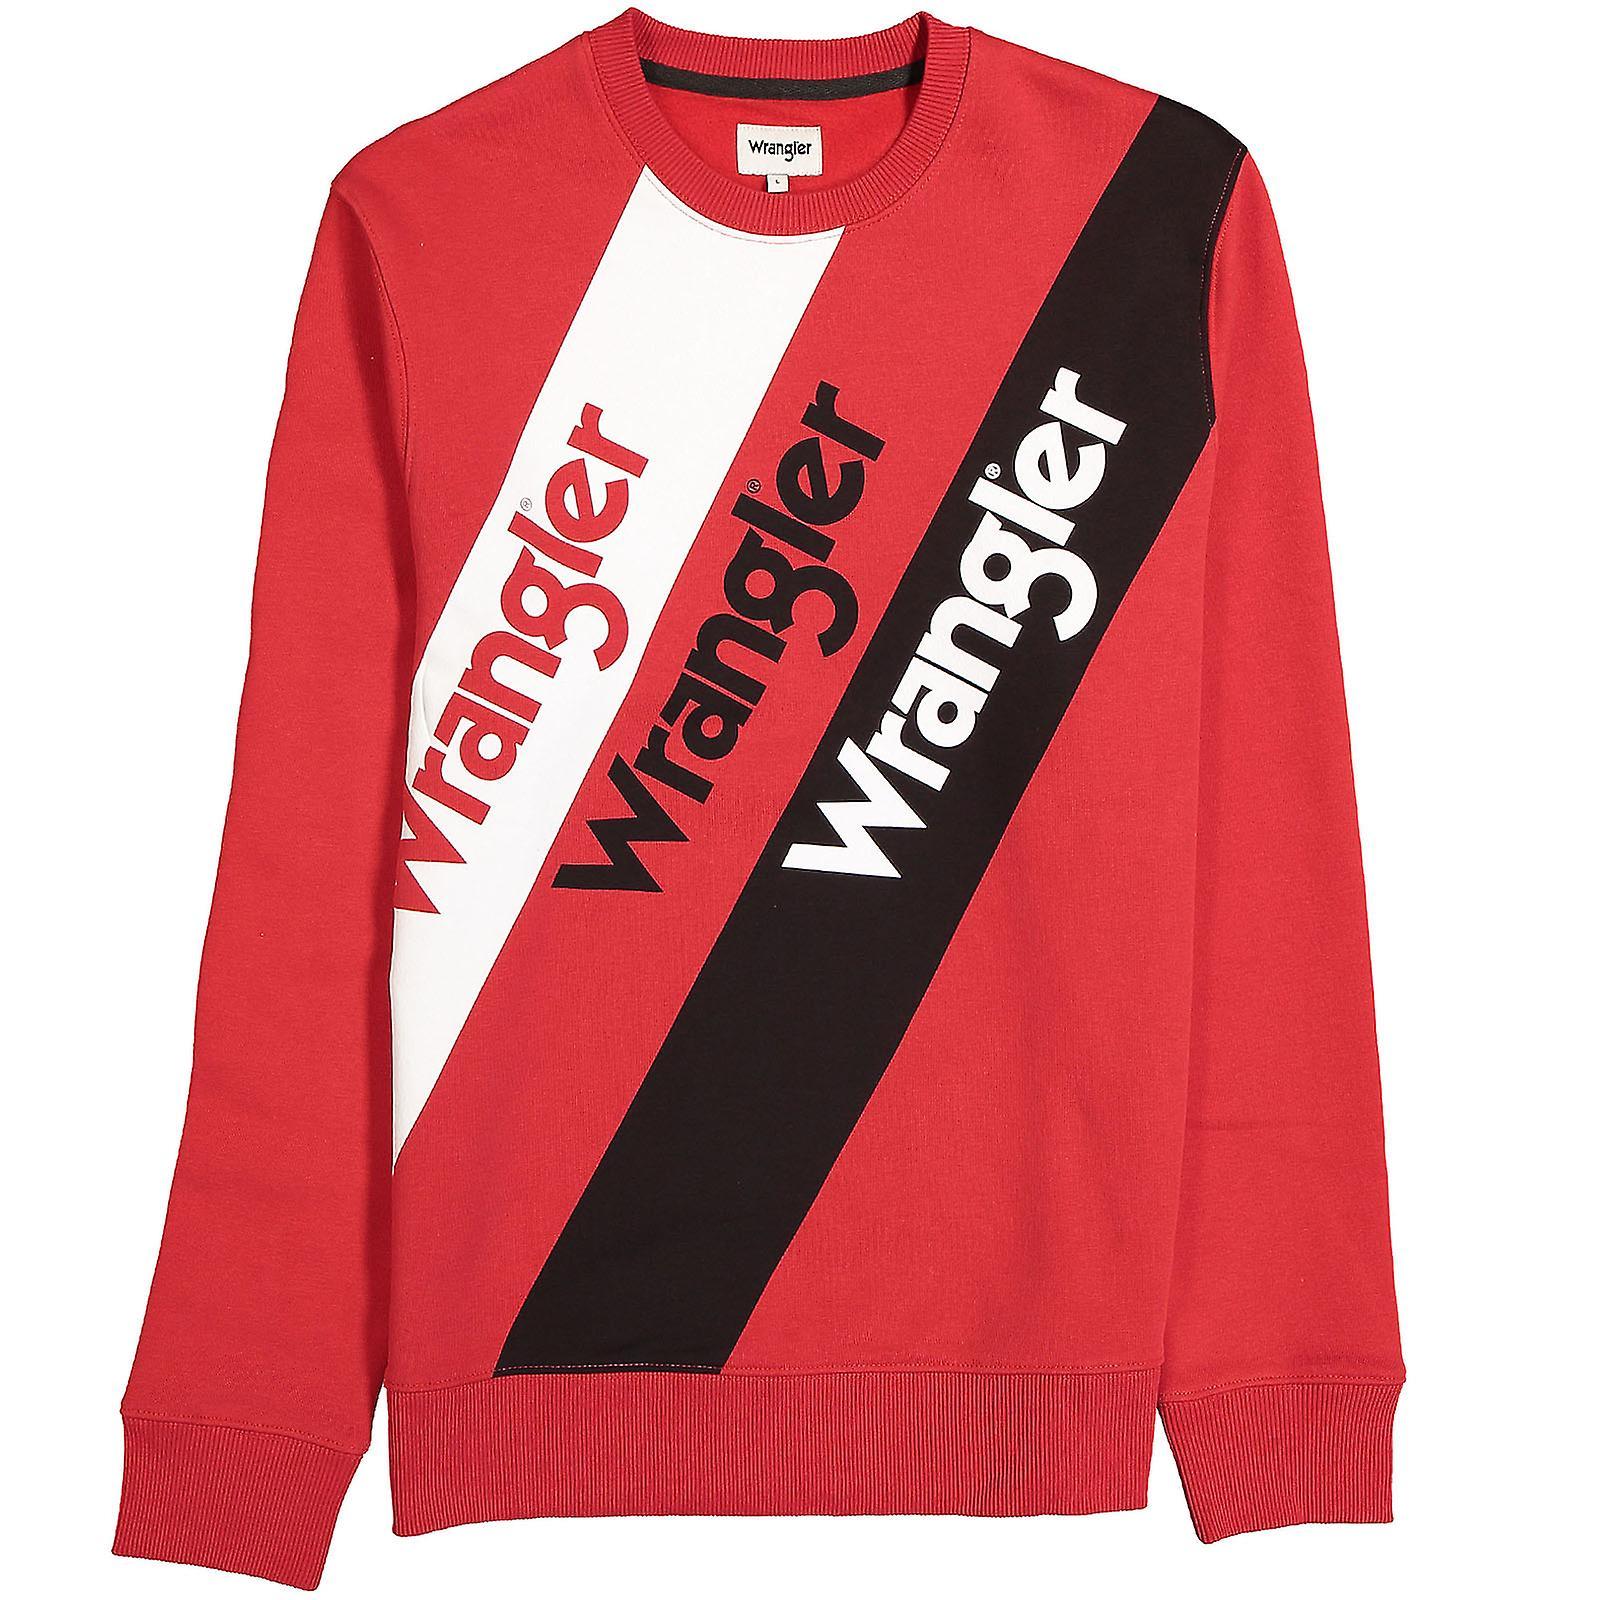 Red and White for the W Logo - Wrangler Mens W Repeat Logo Crew Neck Pullover Jumper Sweatshirt Top ...